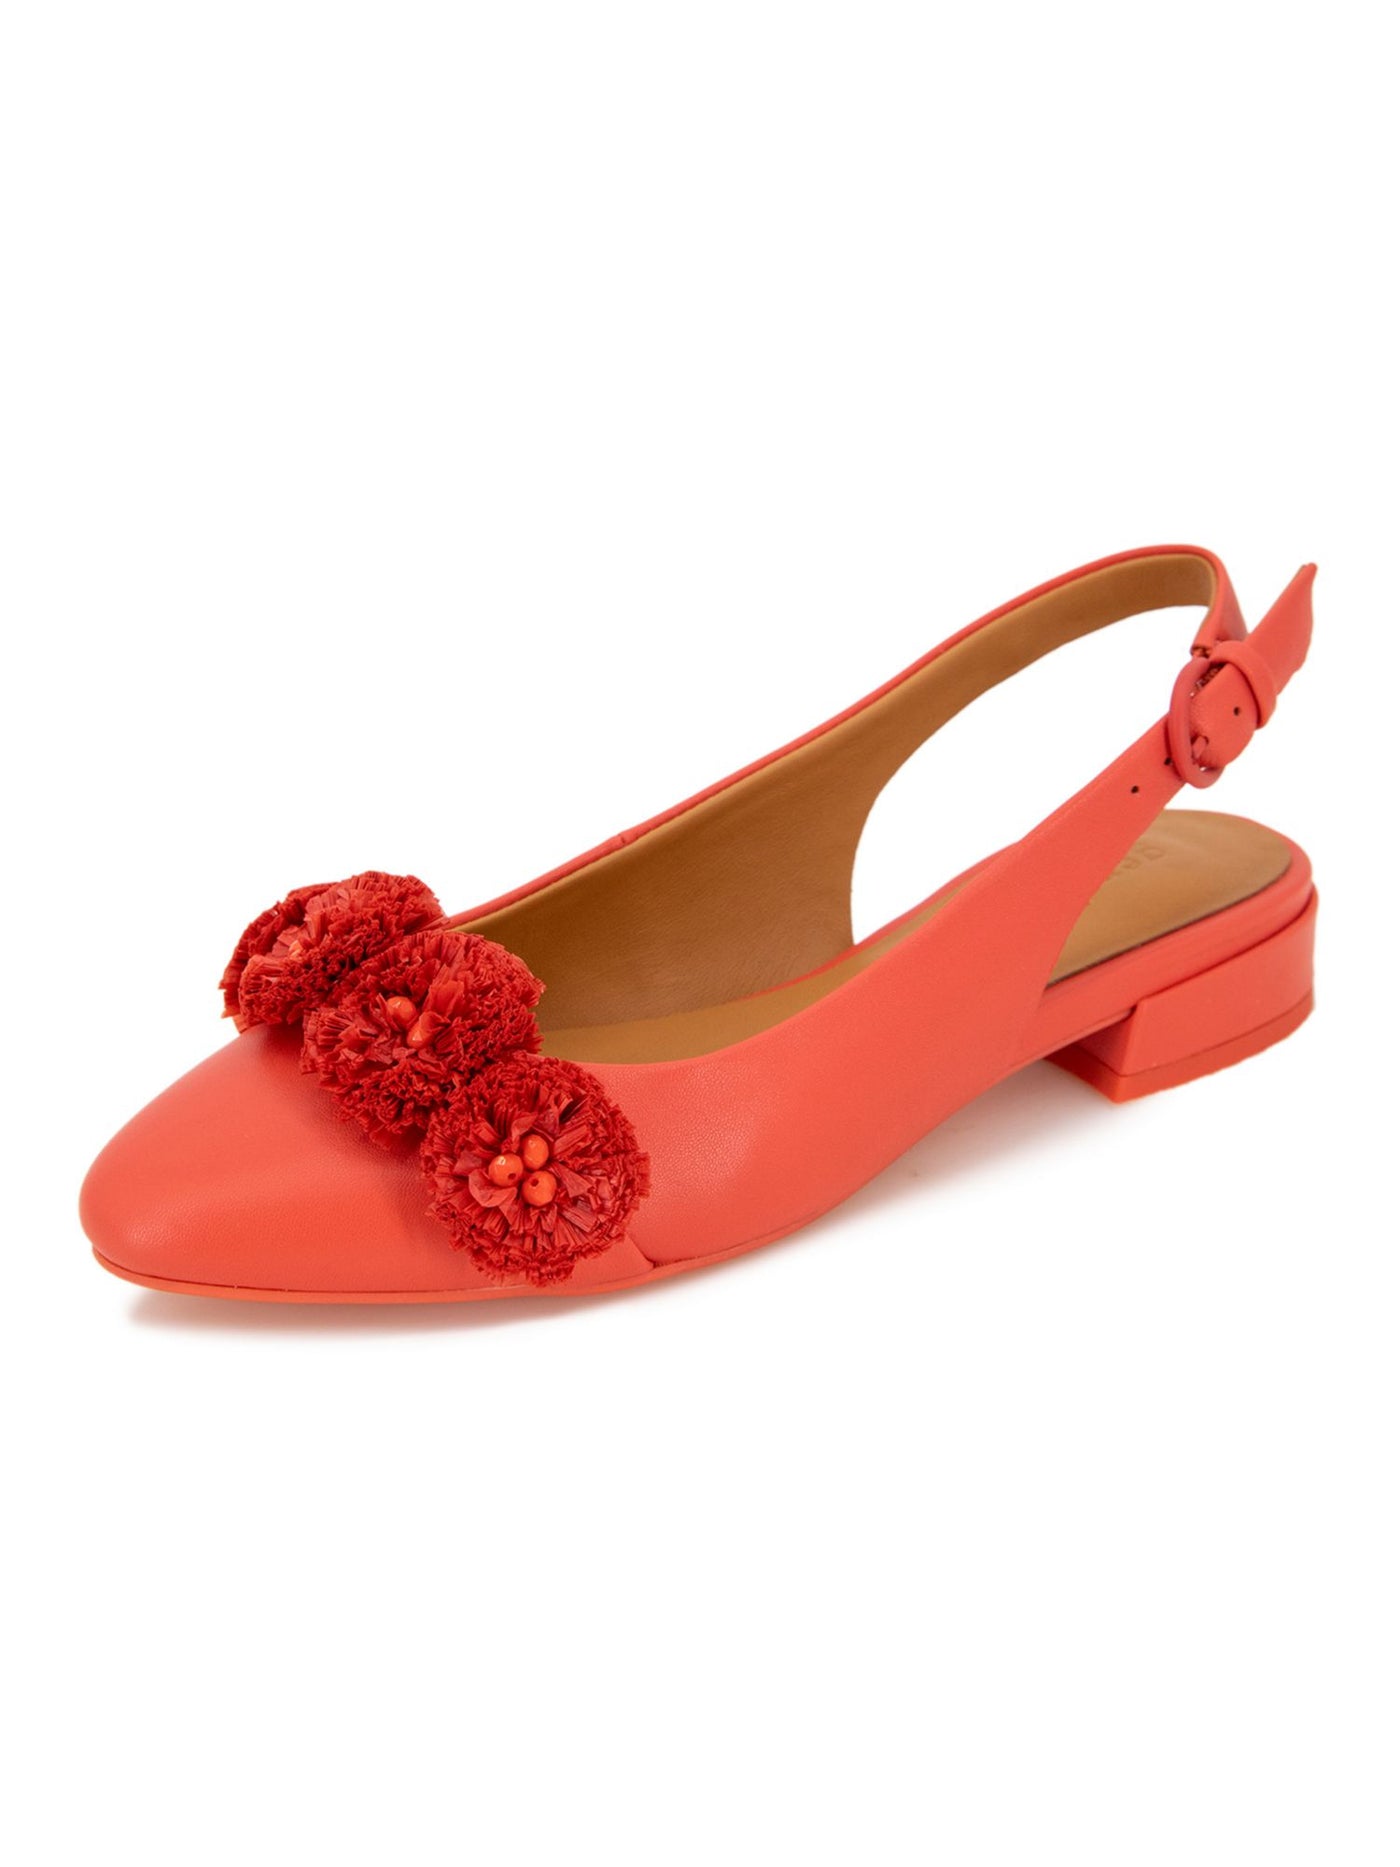 GENTLE SOULS KENNETH COLE Womens Coral Pom Pom At Vamp Cushioned Anana Pointy Toe Buckle Leather Slingback Sandal 7 M